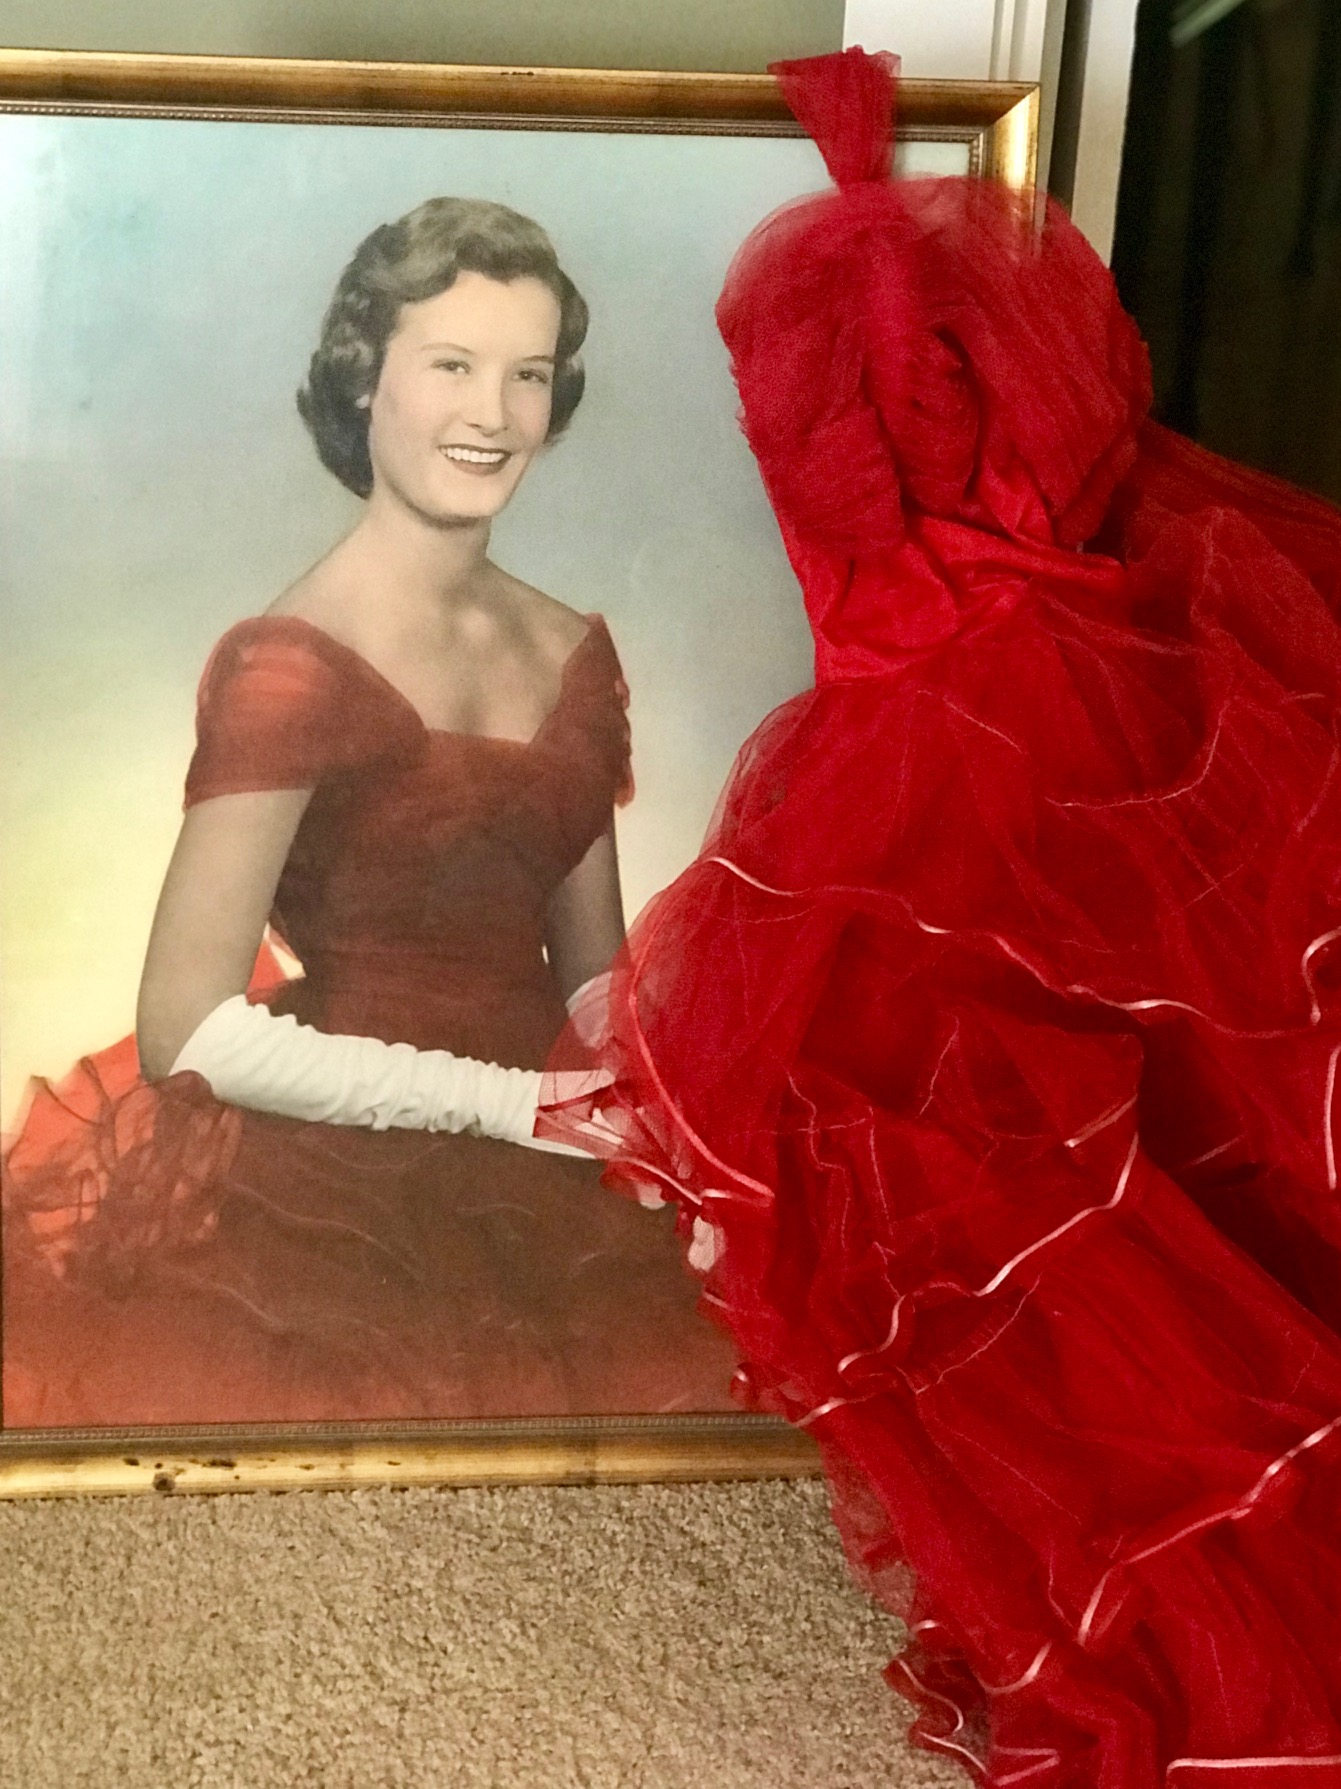 The Red Dress Story